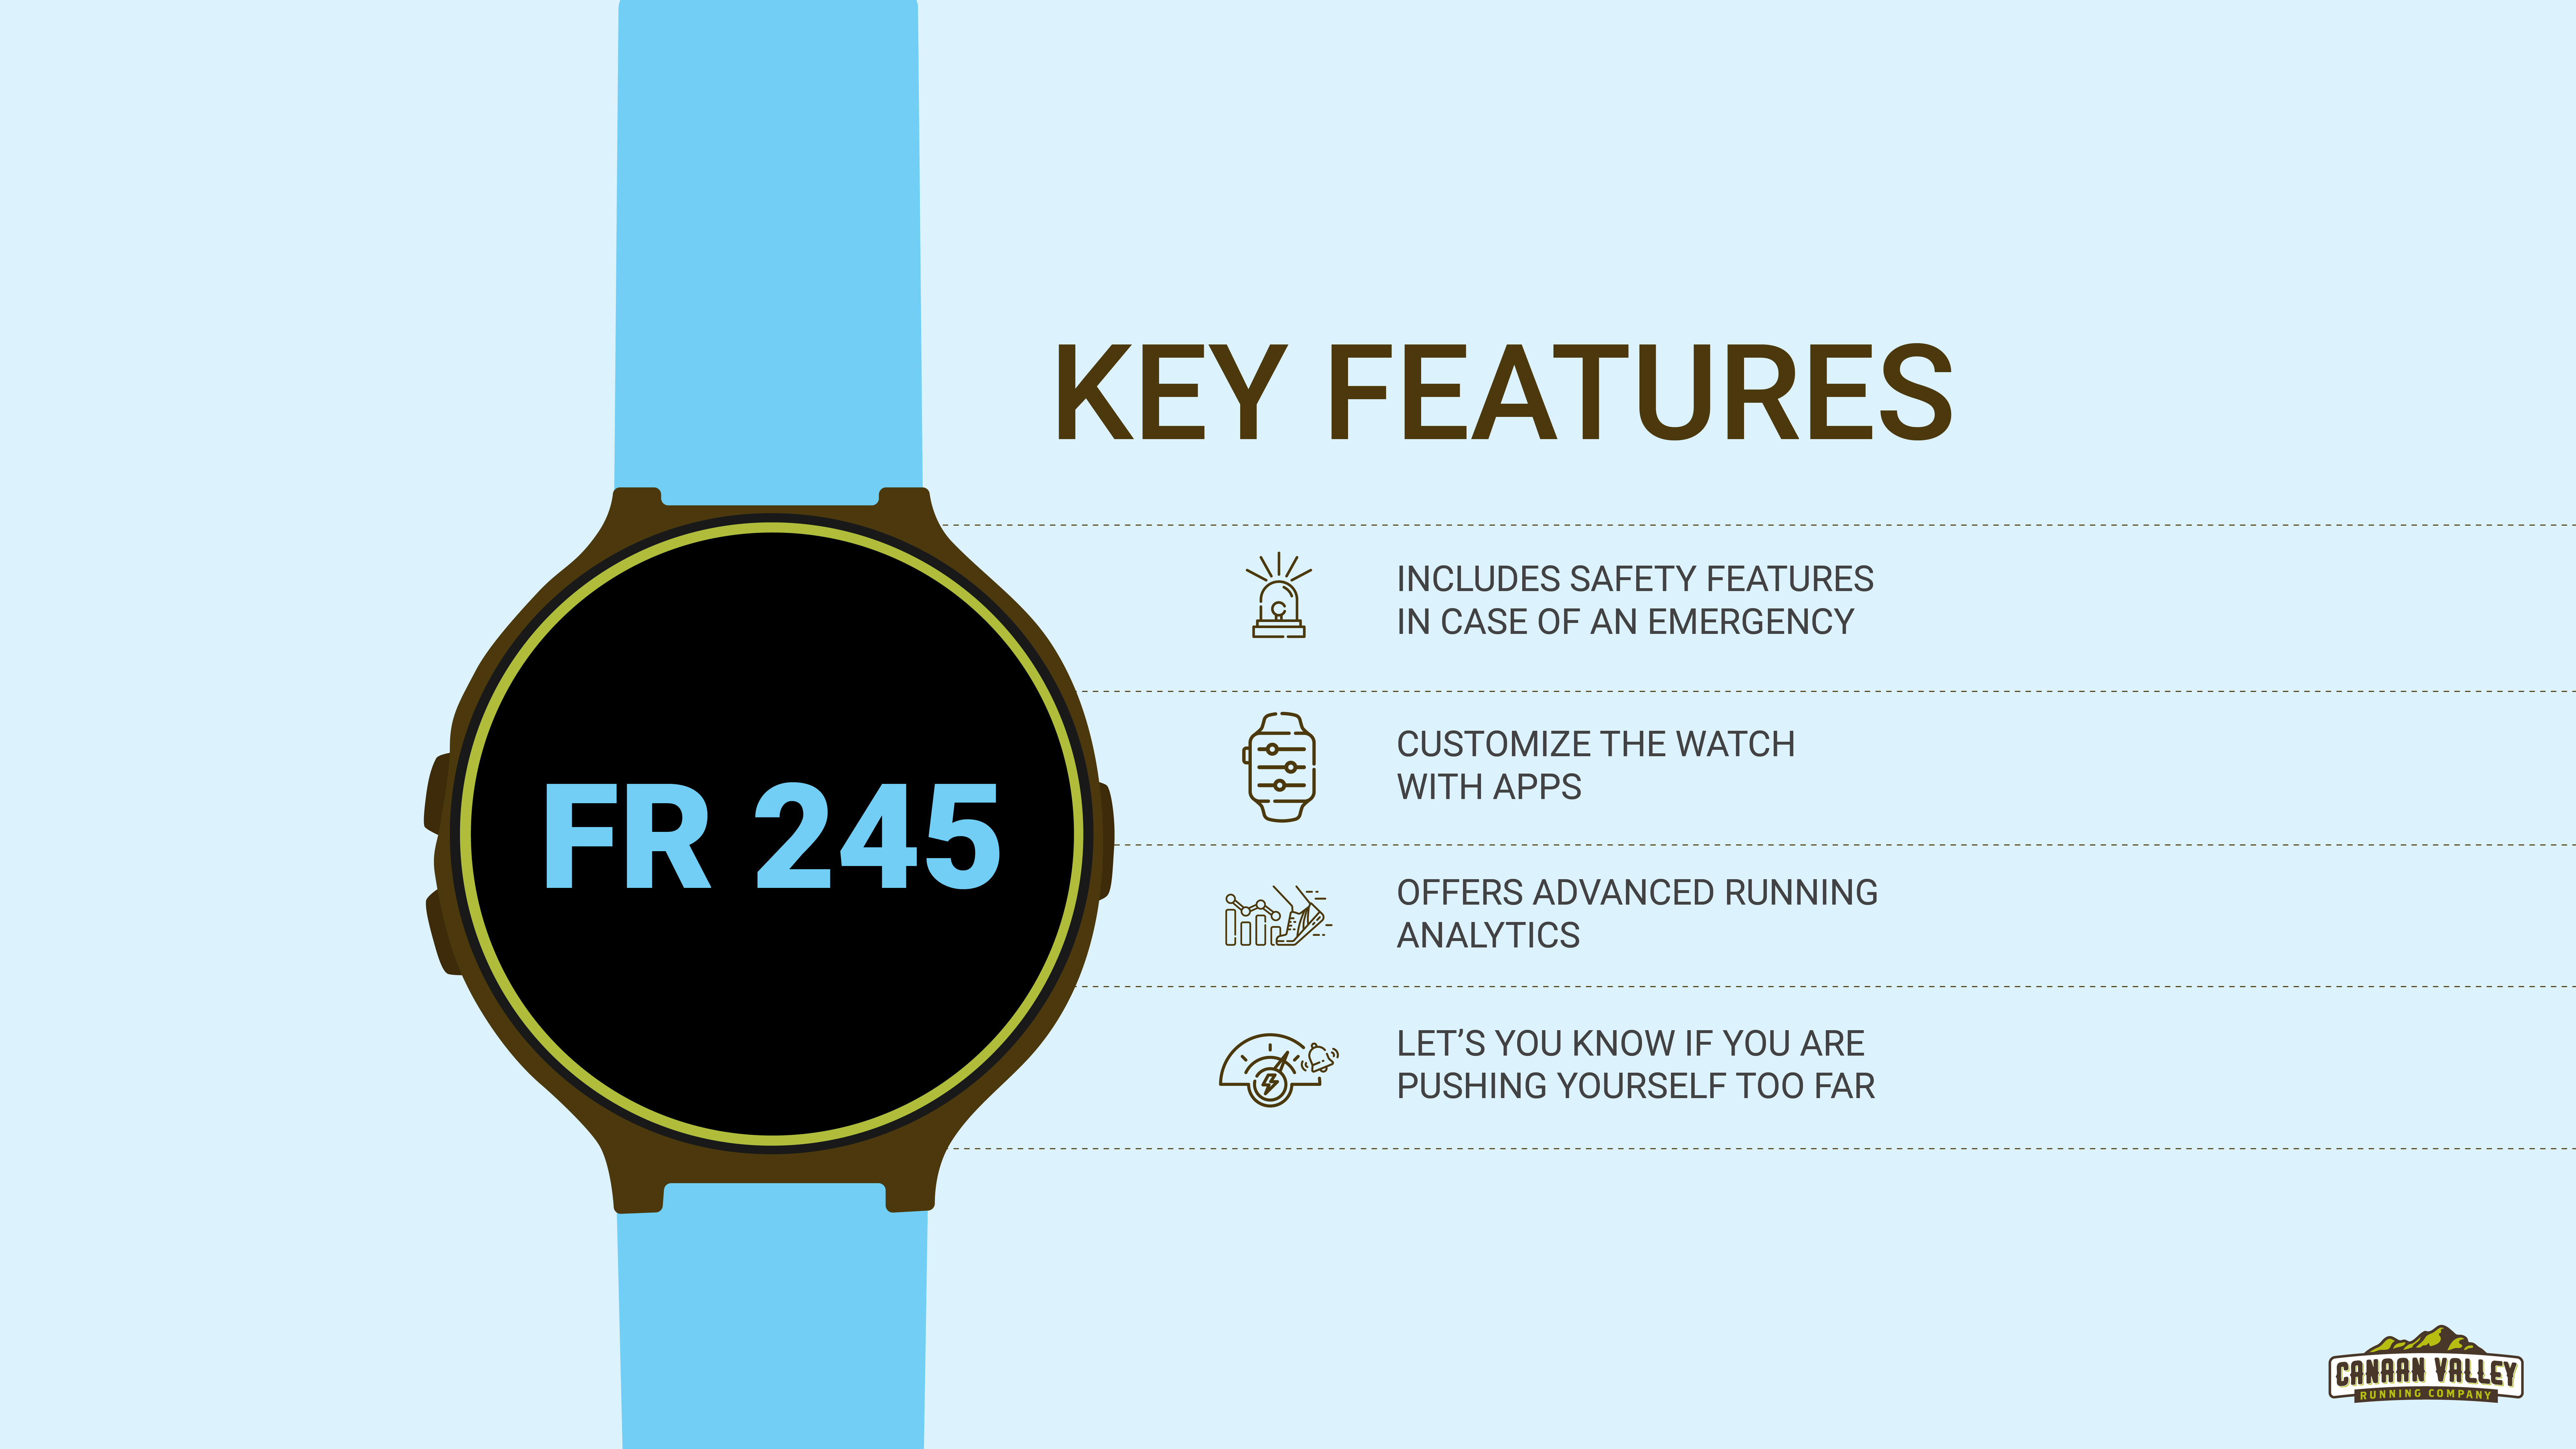 Key Features for the Garmin Forerunner 245